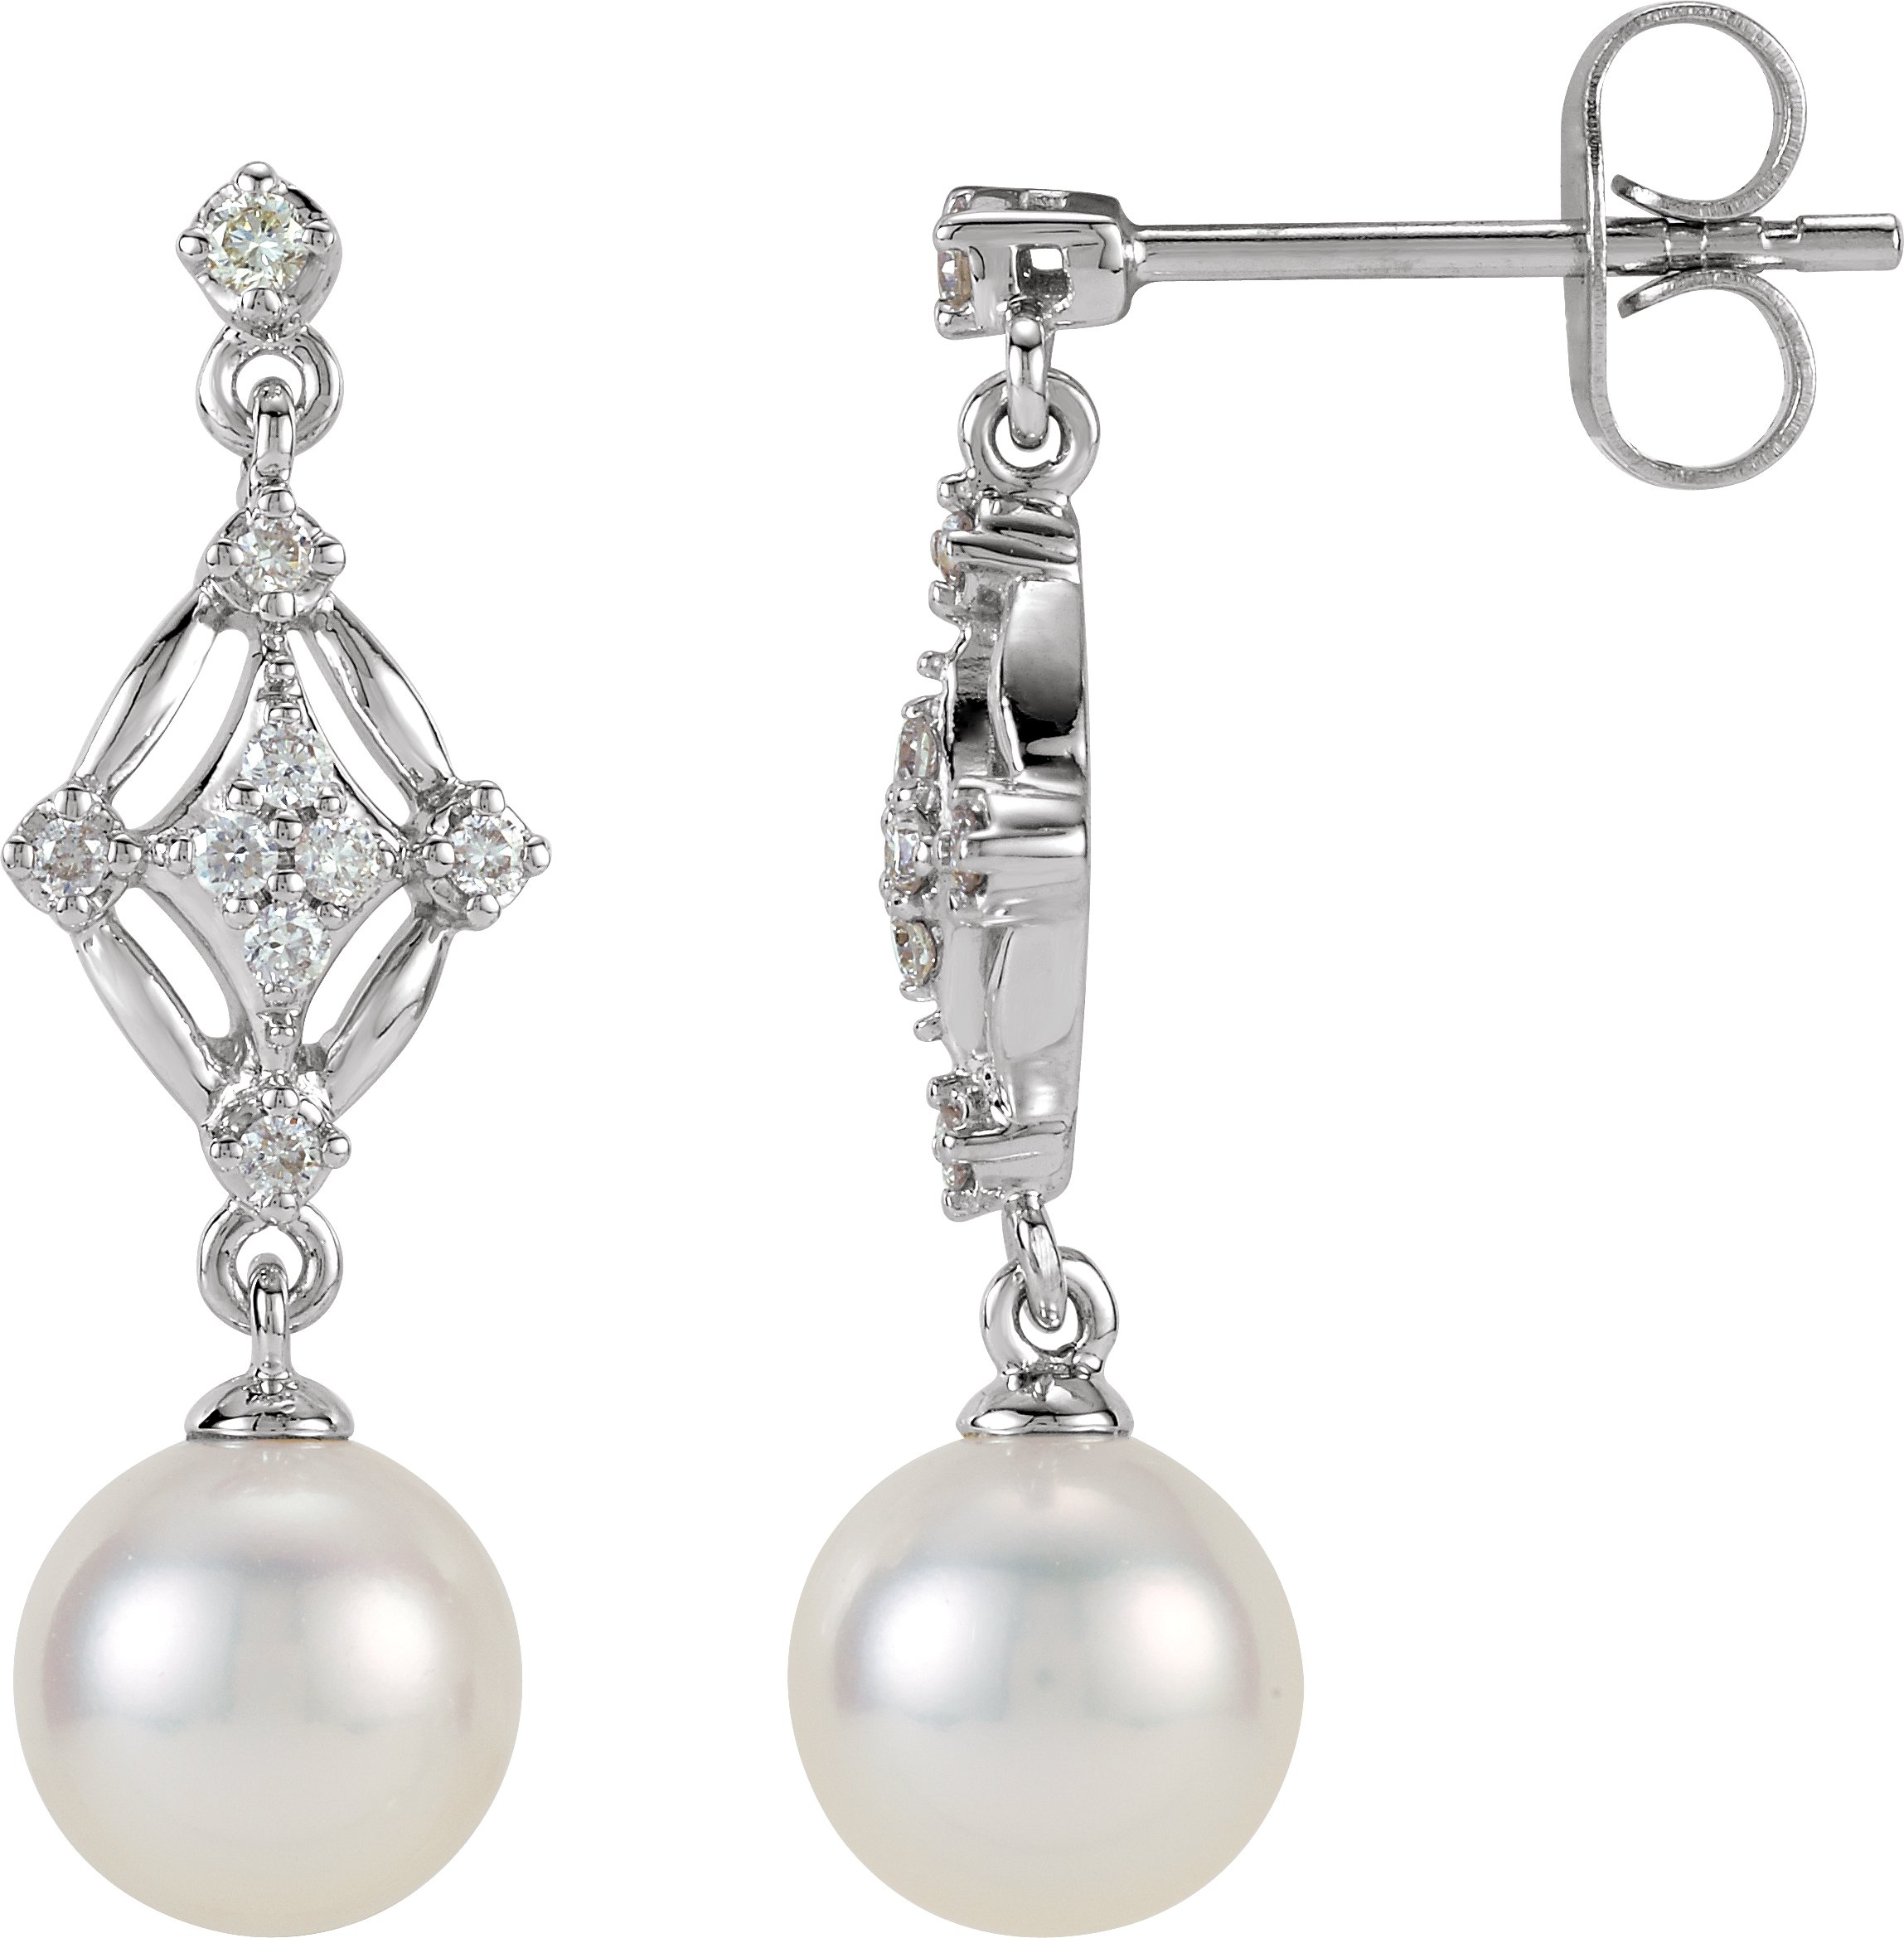 14K White .167 CTW Diamond and Freshwater Cultured Pearl Earrings Ref. 4515951